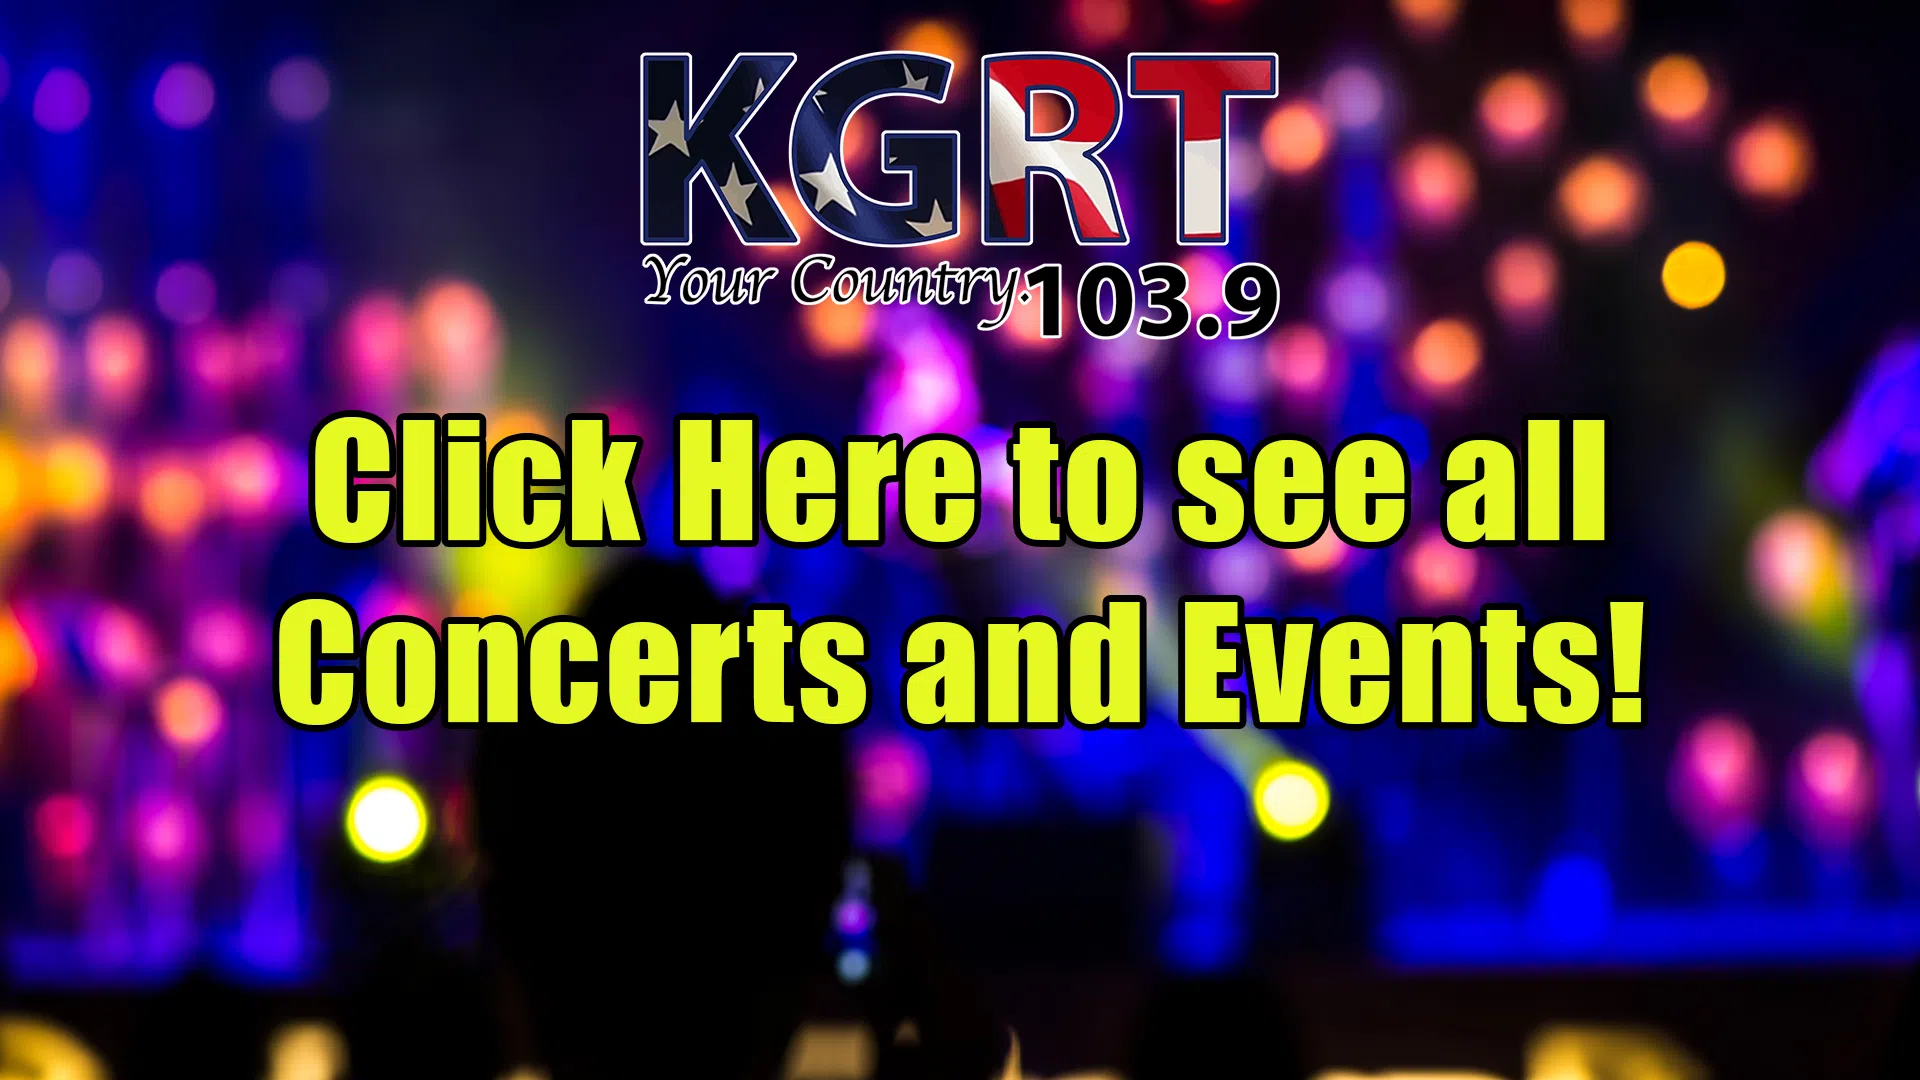 Feature: https://www.kgrt.com/concerts-and-events/